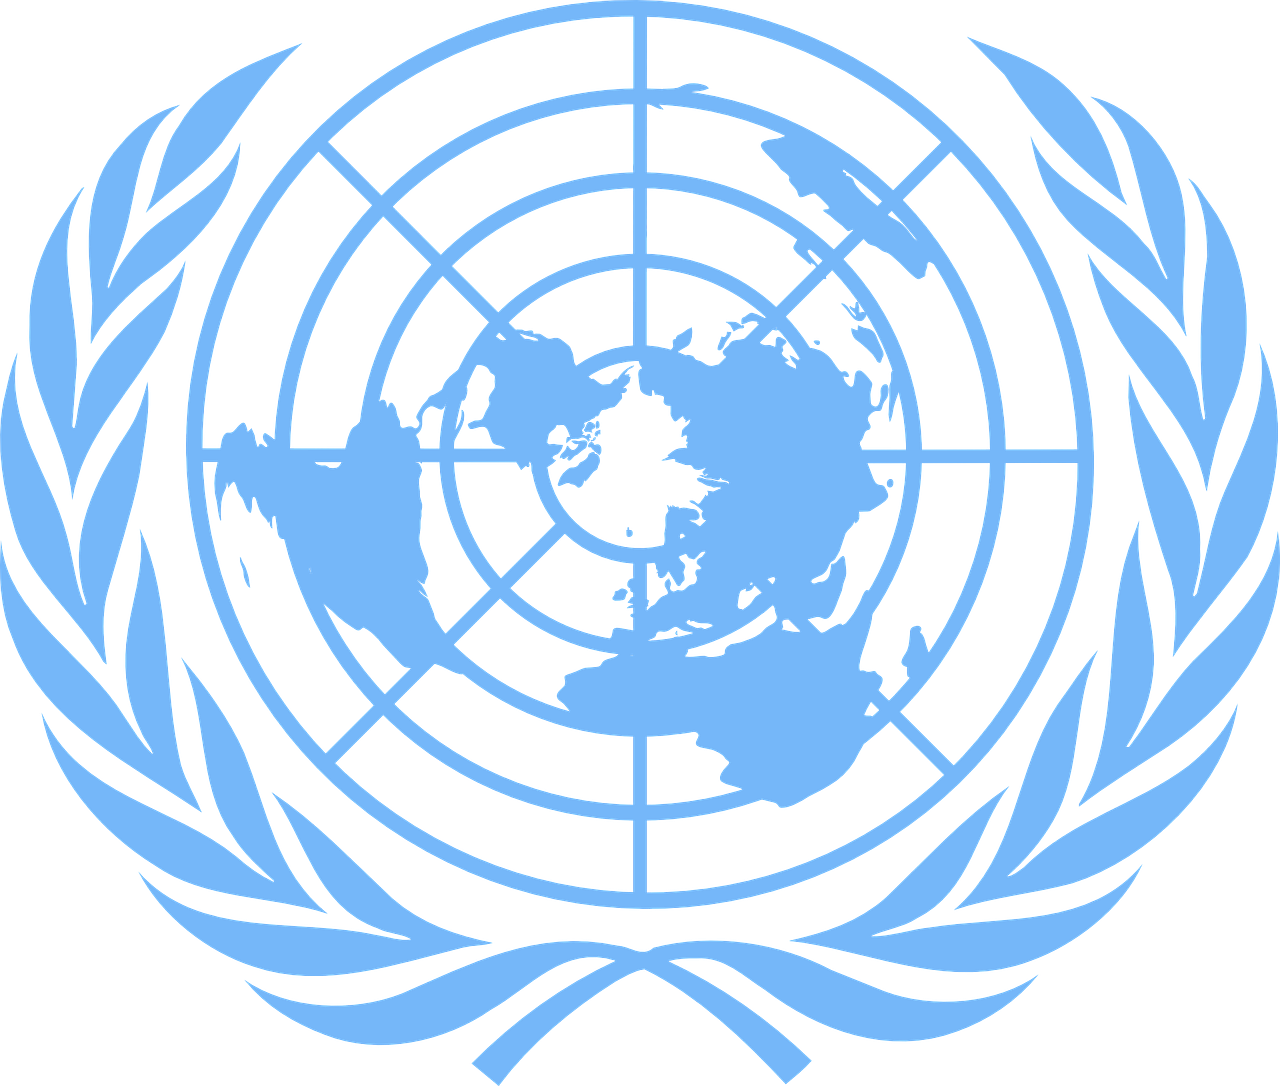 united-nations-g1ed194a6d_1280.png